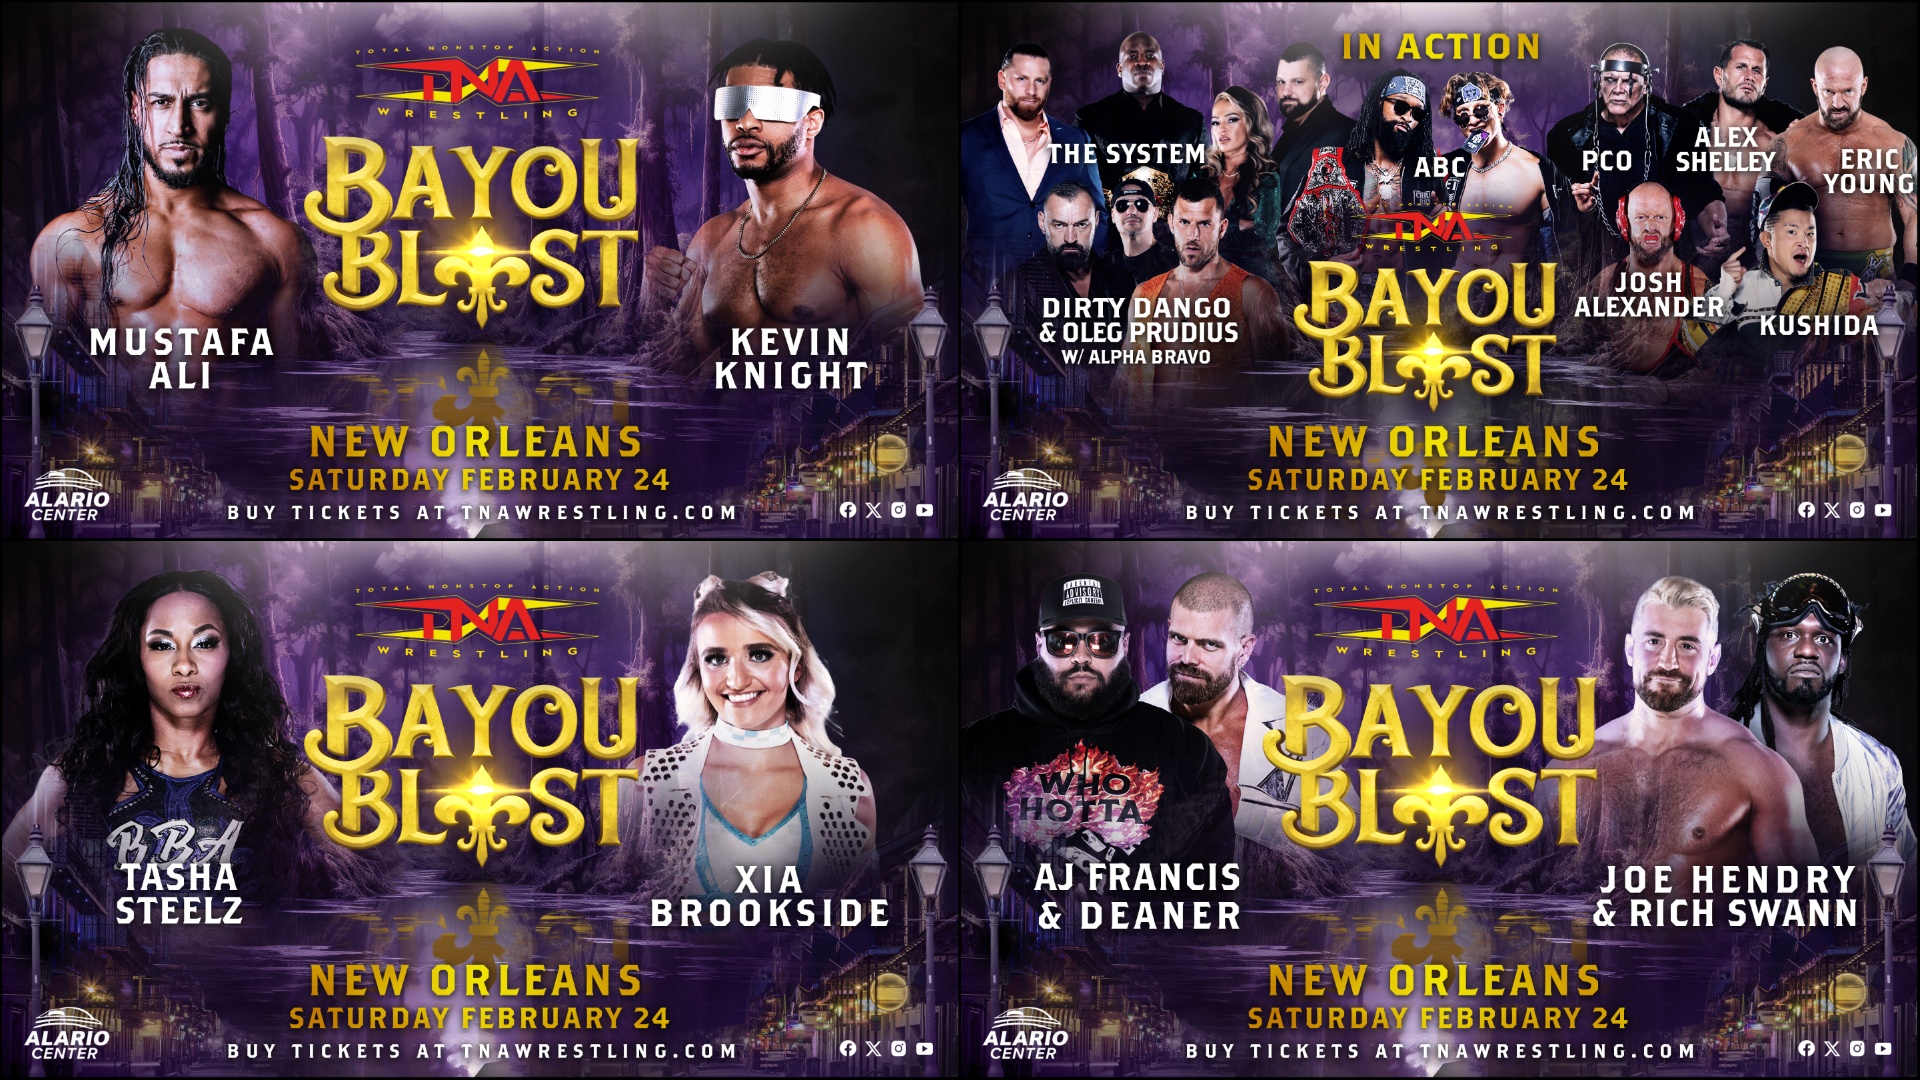 Photo of New Orleans! See Your Favorite TNA Stars in Action This Saturday at Bayou Blast – TNA Wrestling